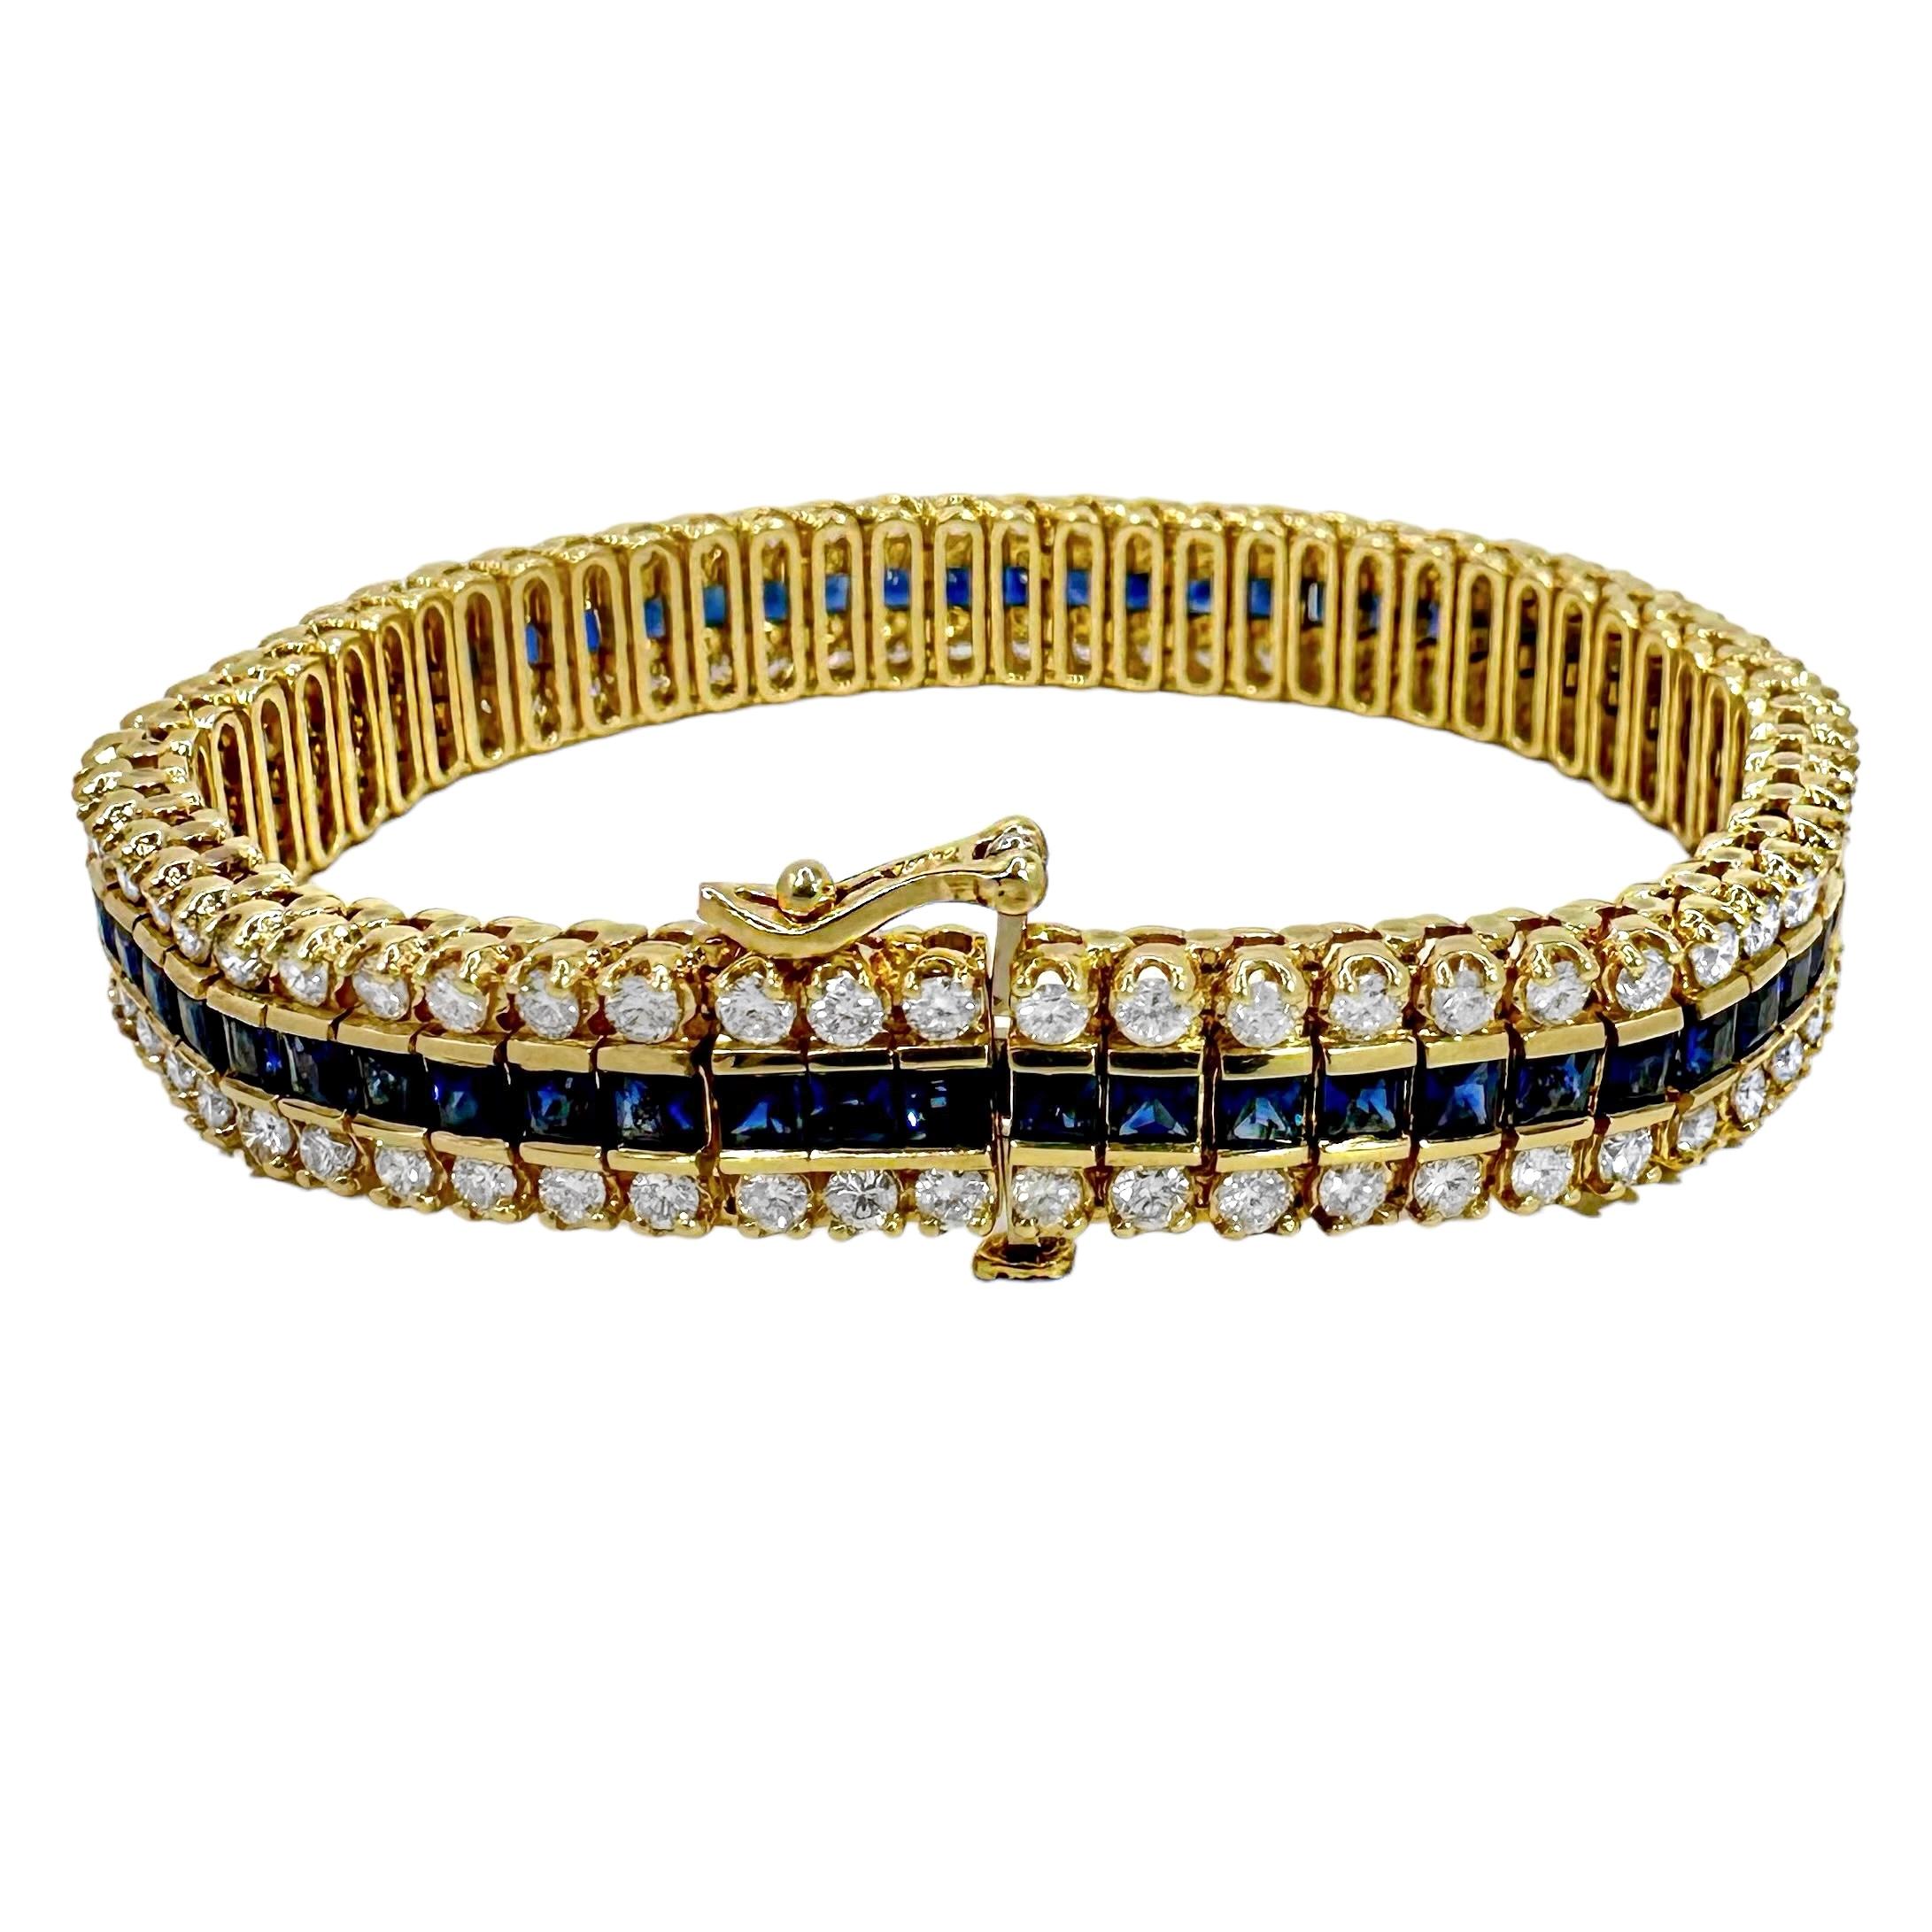 Modern 3 Row Gold Tennis Bracelet With 2 Diamond Rows Surrounding 1 Row of Sapphires For Sale